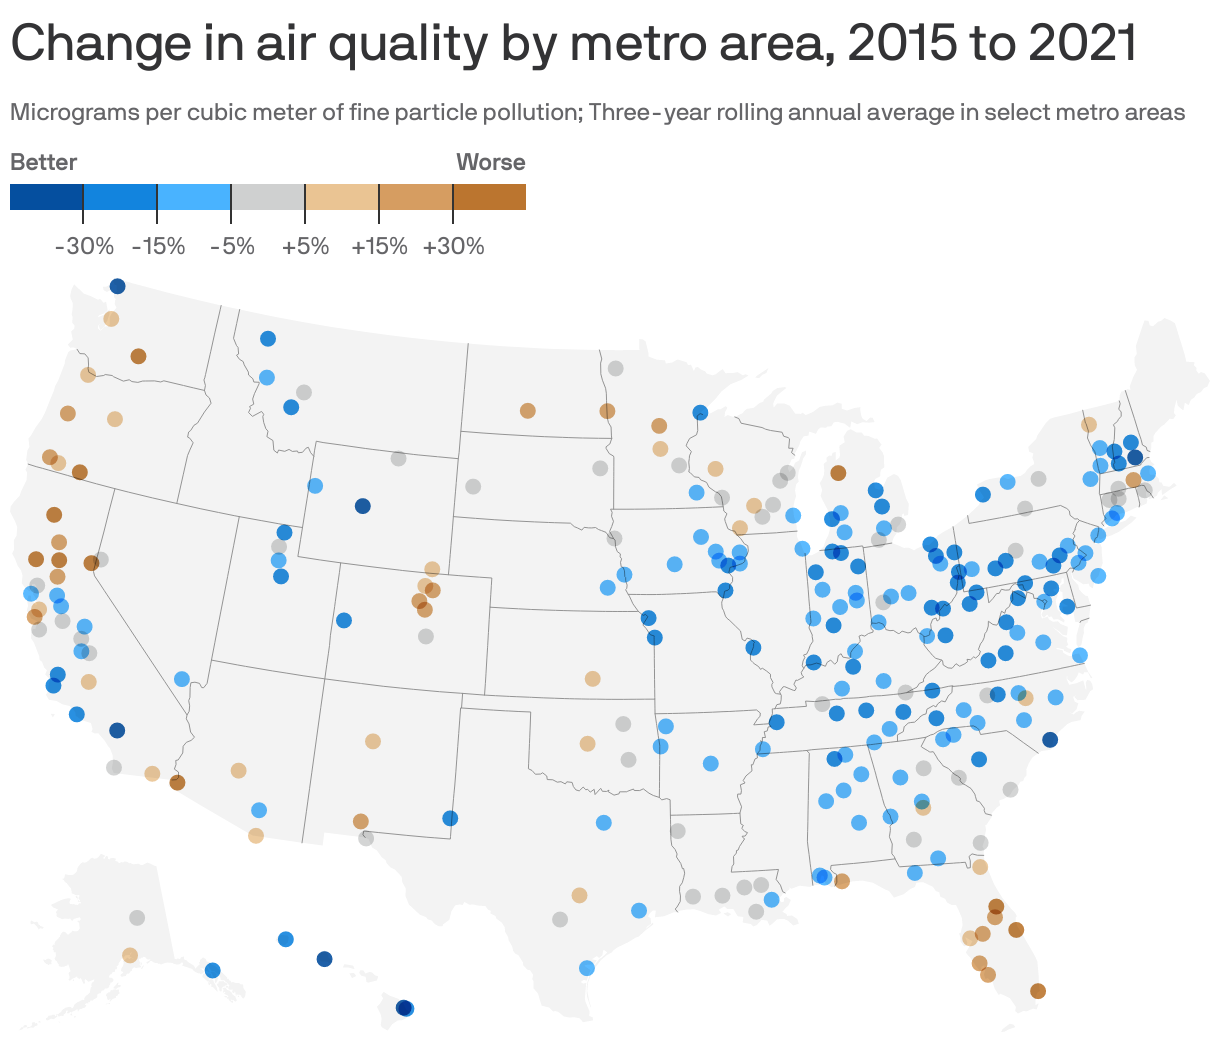 Change in air quality by metro area, 2015 to 2021